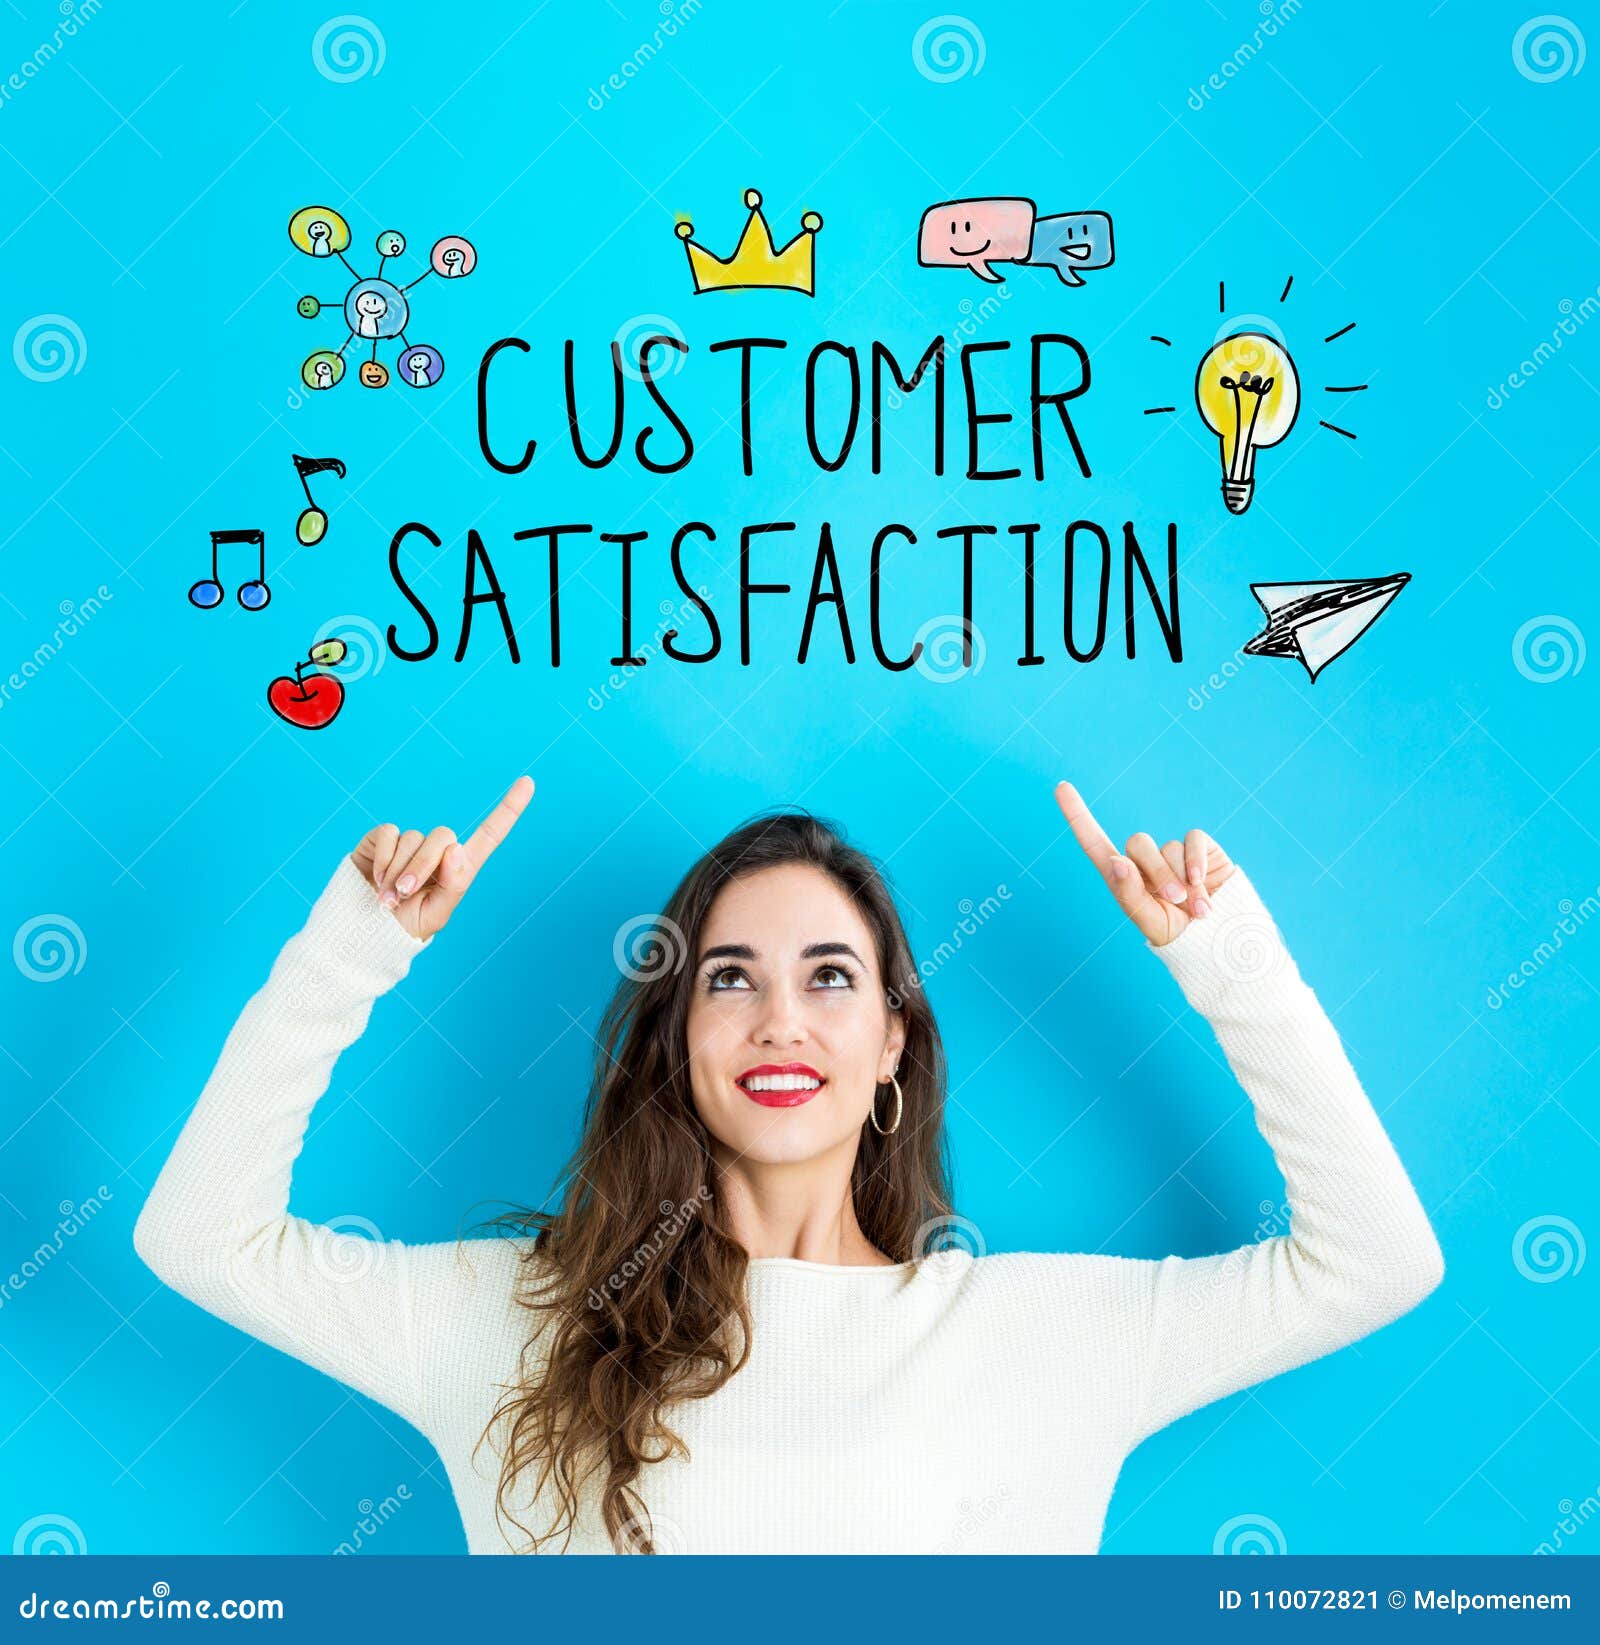 customer satisfaction with young woman looking upwards